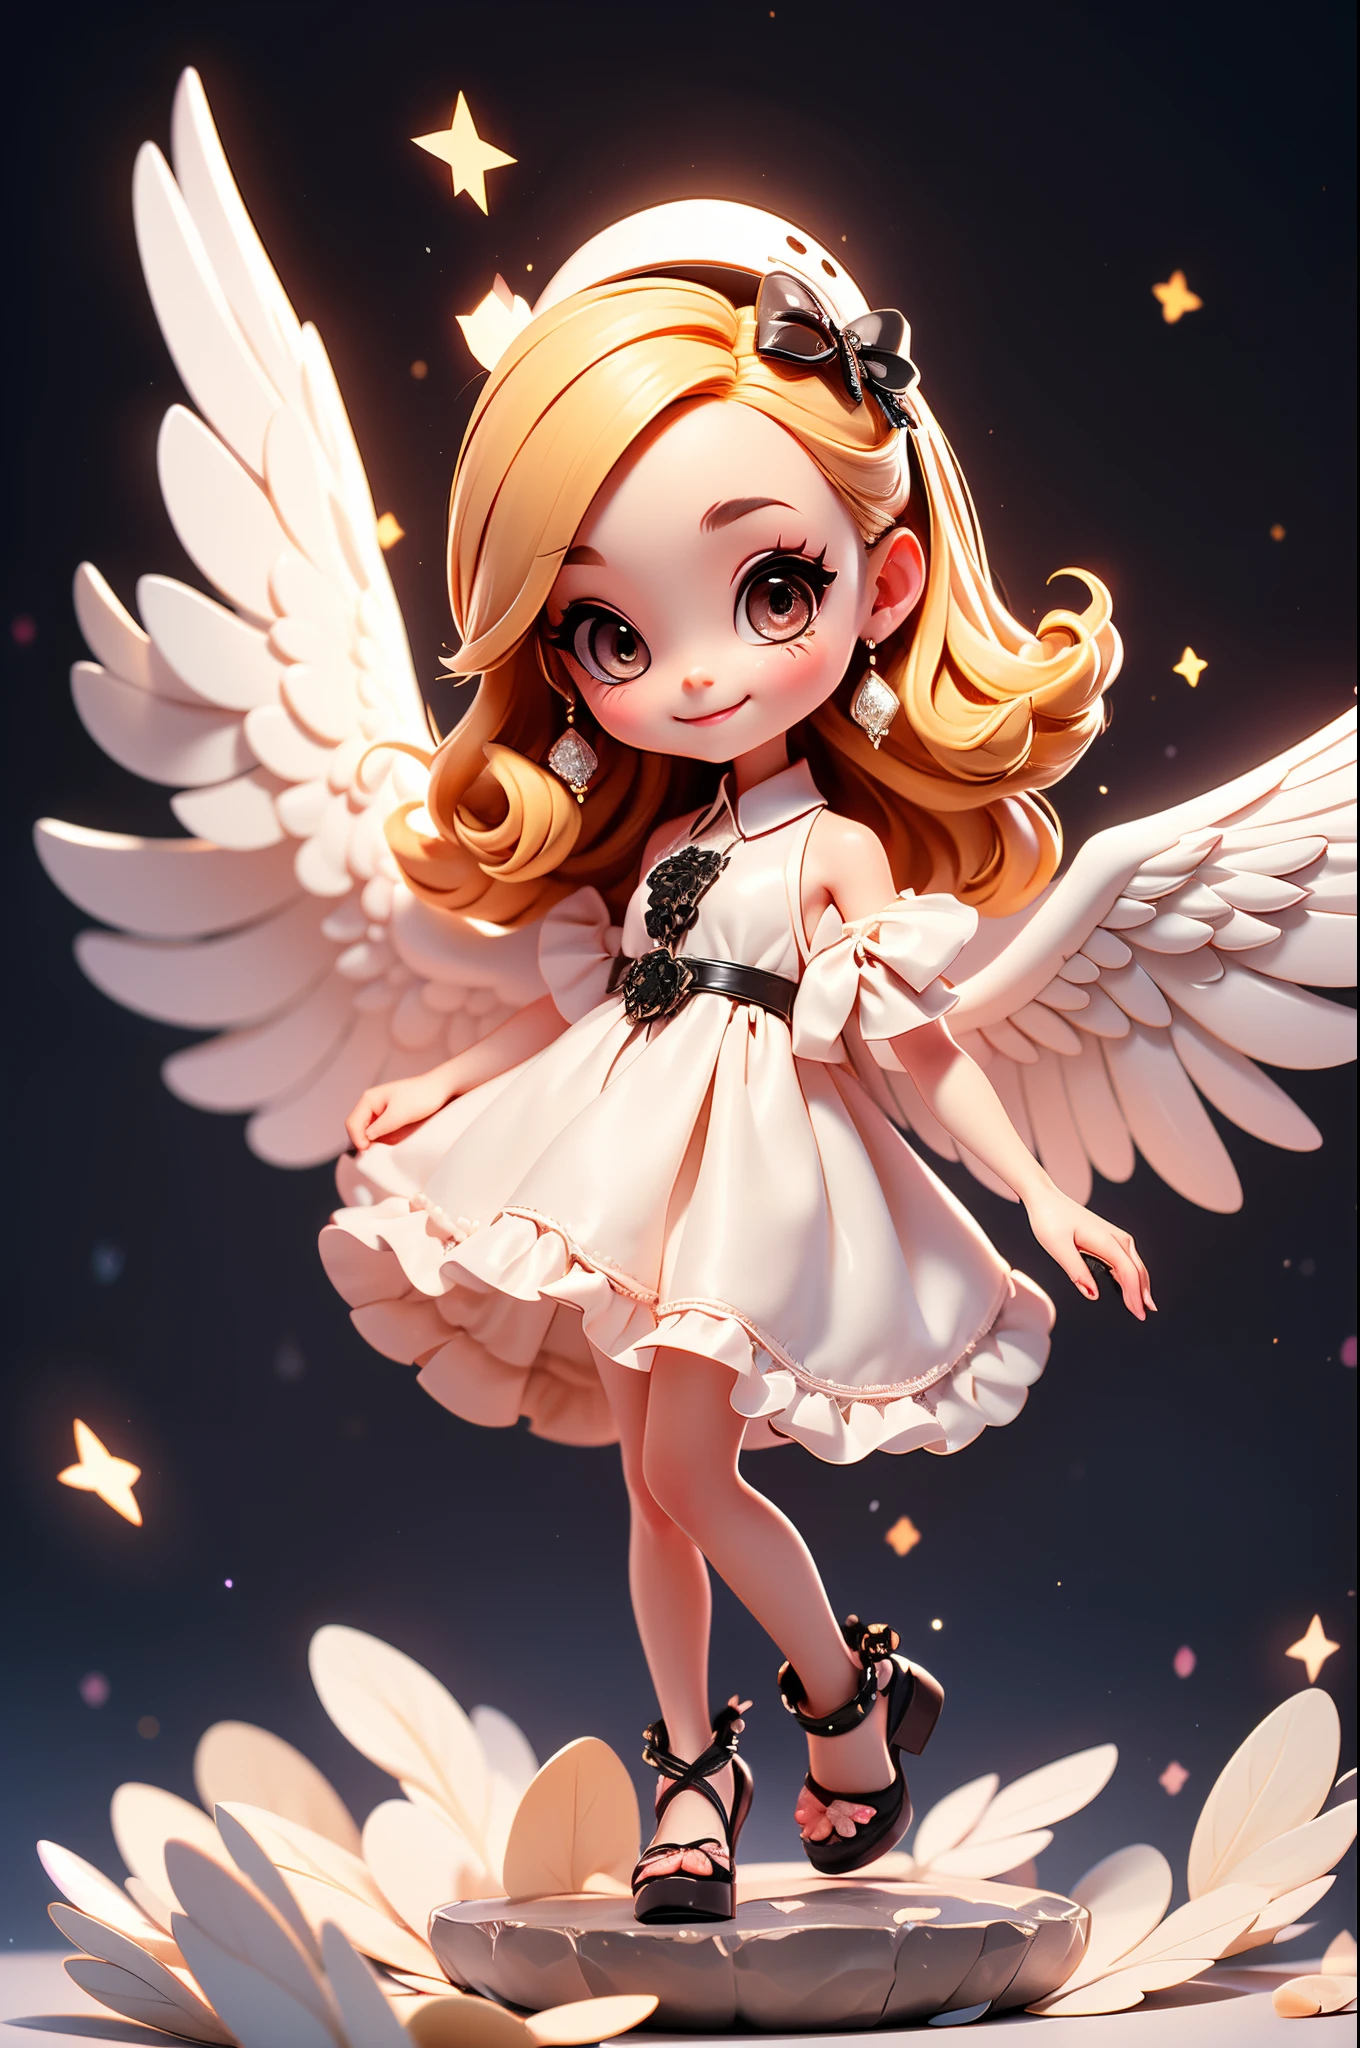 Blonde girl with black wings and black pearls in a white dress of crystal clear thin fabric,A smile、Reach out before you、Floating in the sky、 Shines